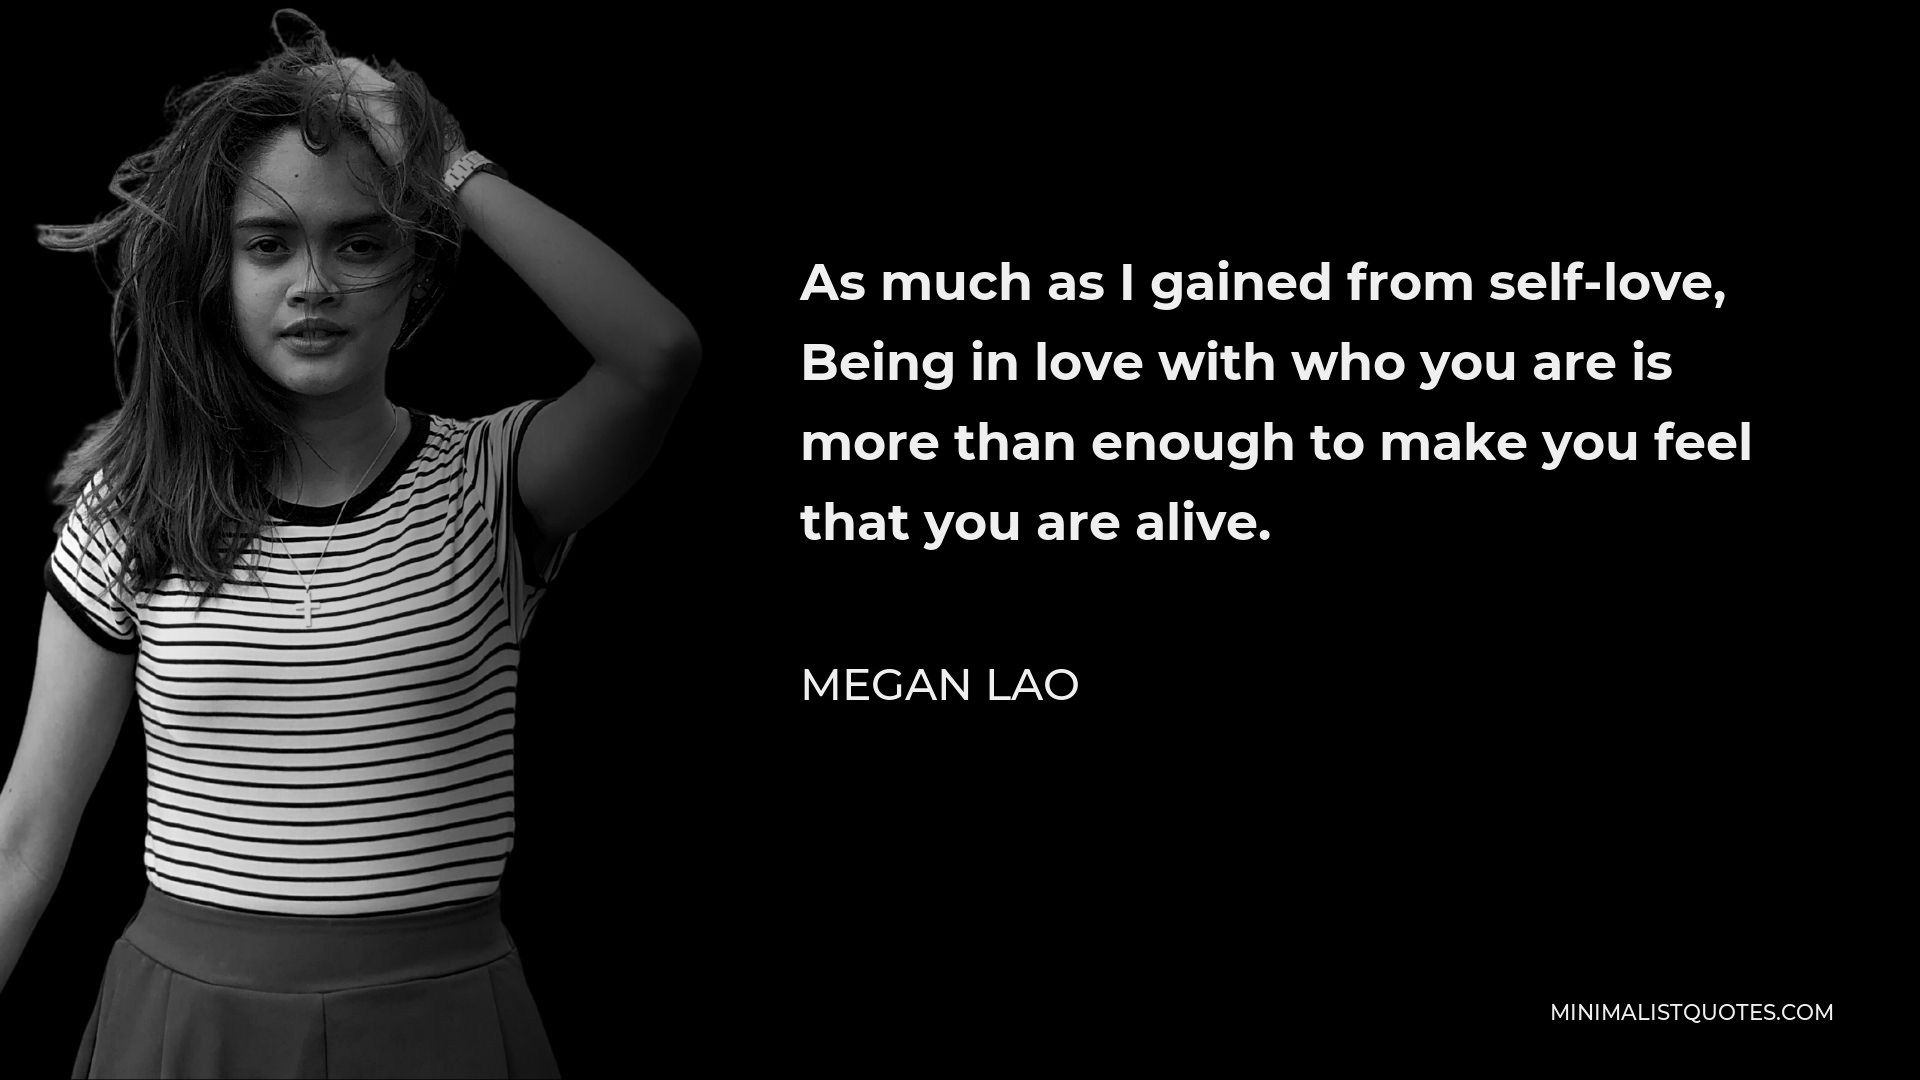 Megan Lao Quote - As much as I gained from self-love, Being in love with who you are is more than enough to make you feel that you are alive.